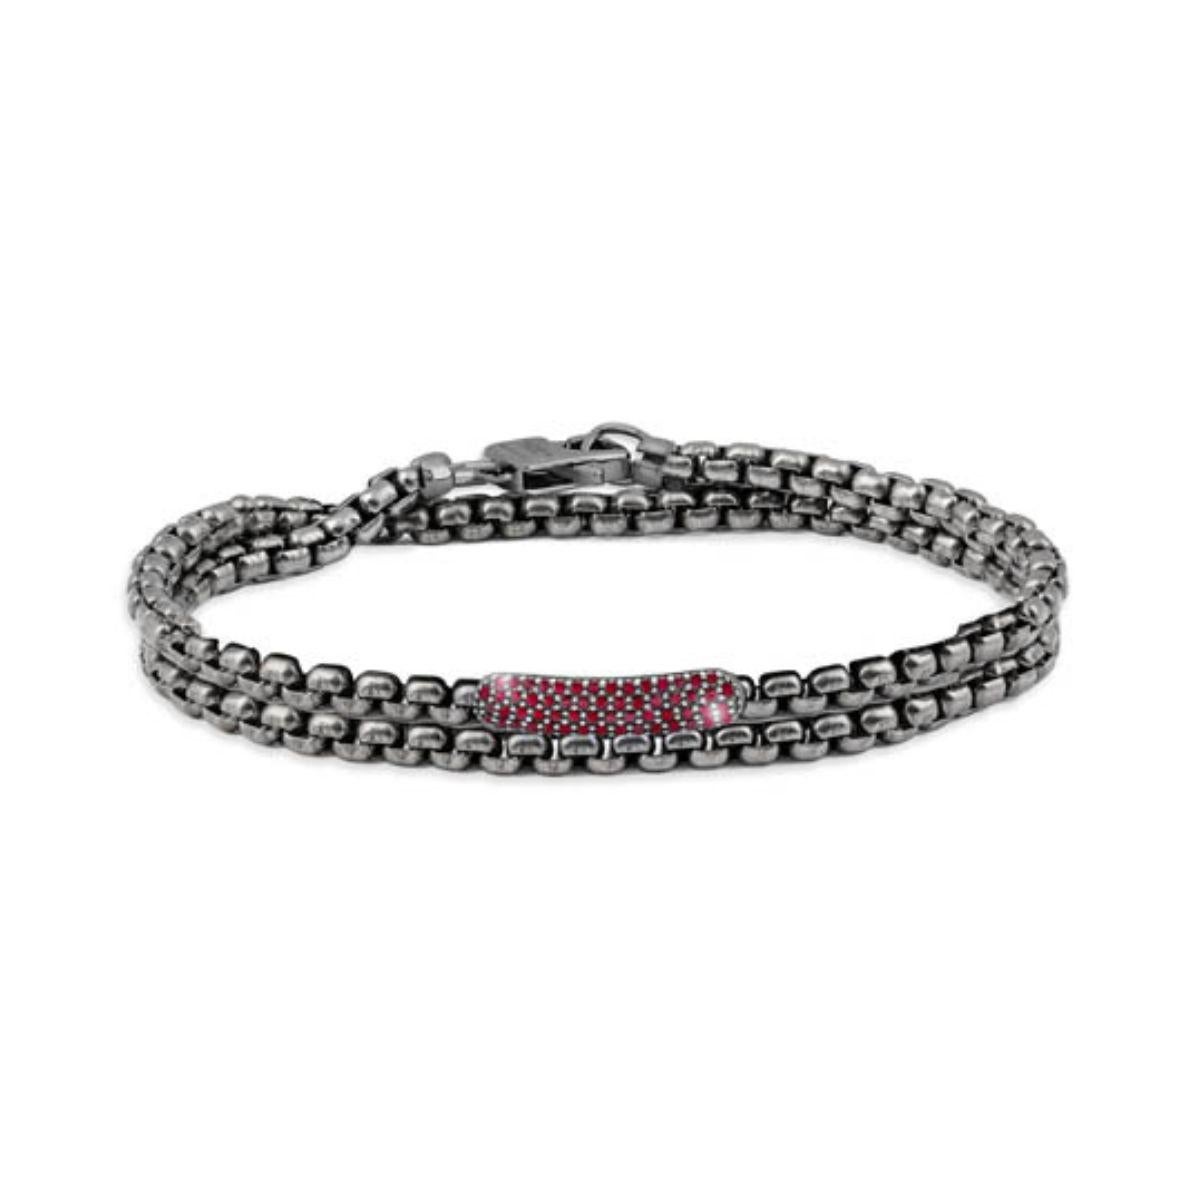 Black Rhodium Plated Sterling Silver Catena Baton Bracelet with Rubies, Size S In New Condition For Sale In Fulham business exchange, London